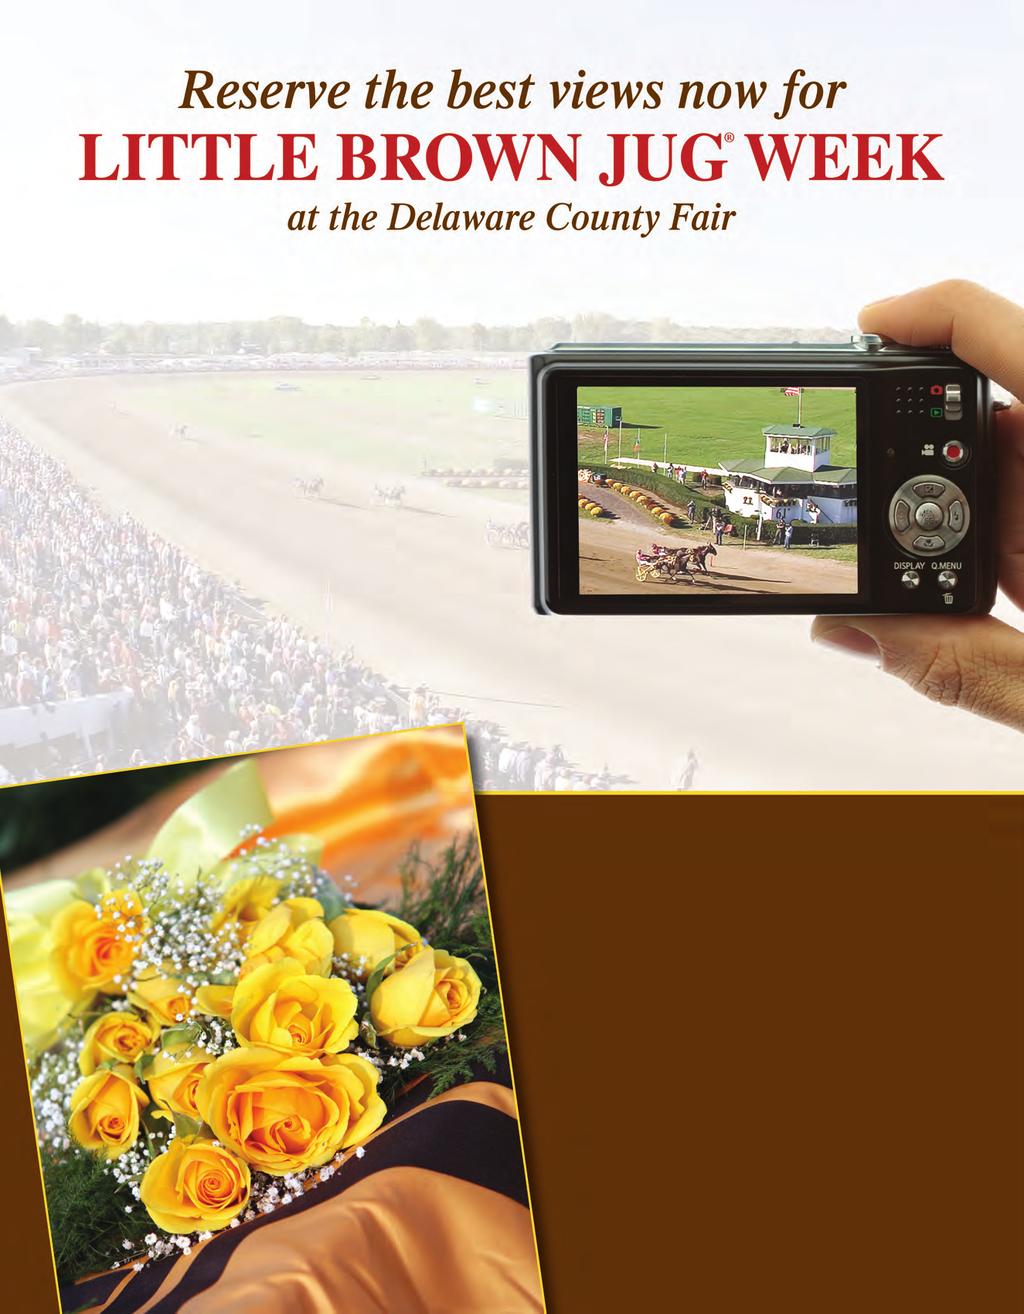 Grand Circuit Racing: September 19 23, 2010 The Jugette September 22 The Little Brown Jug September 23 Enjoy real VIP treatment on the first turn in the VIP PAVILION A delicious buffet served all